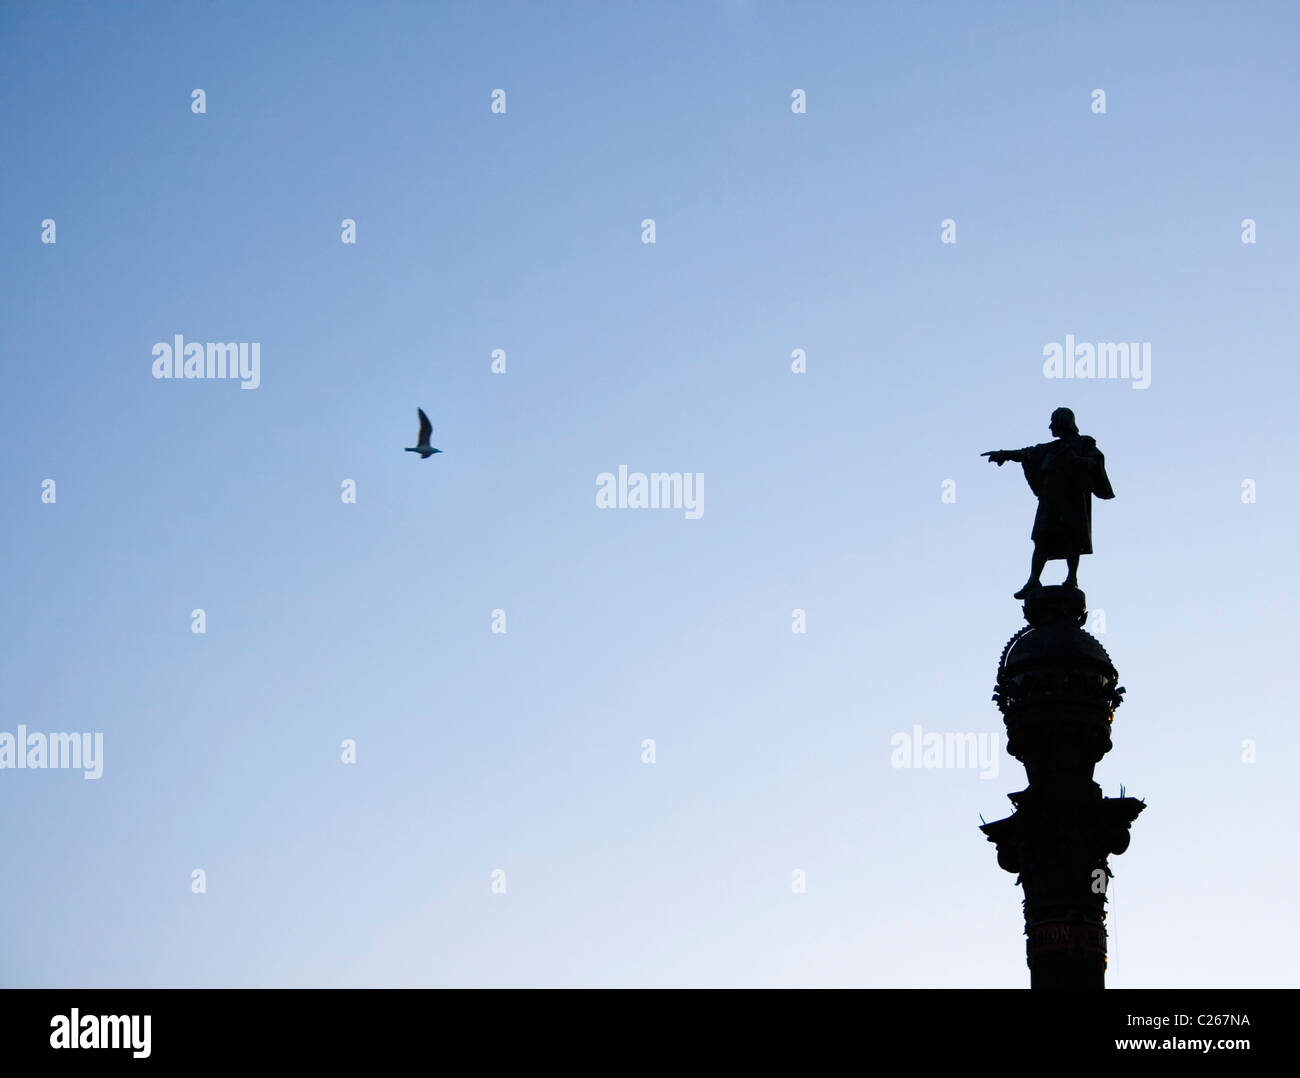 Barcelona, Spain. Silhouette of The Columbus Monument. Columbus appears to be pointing at a seagull. Stock Photo